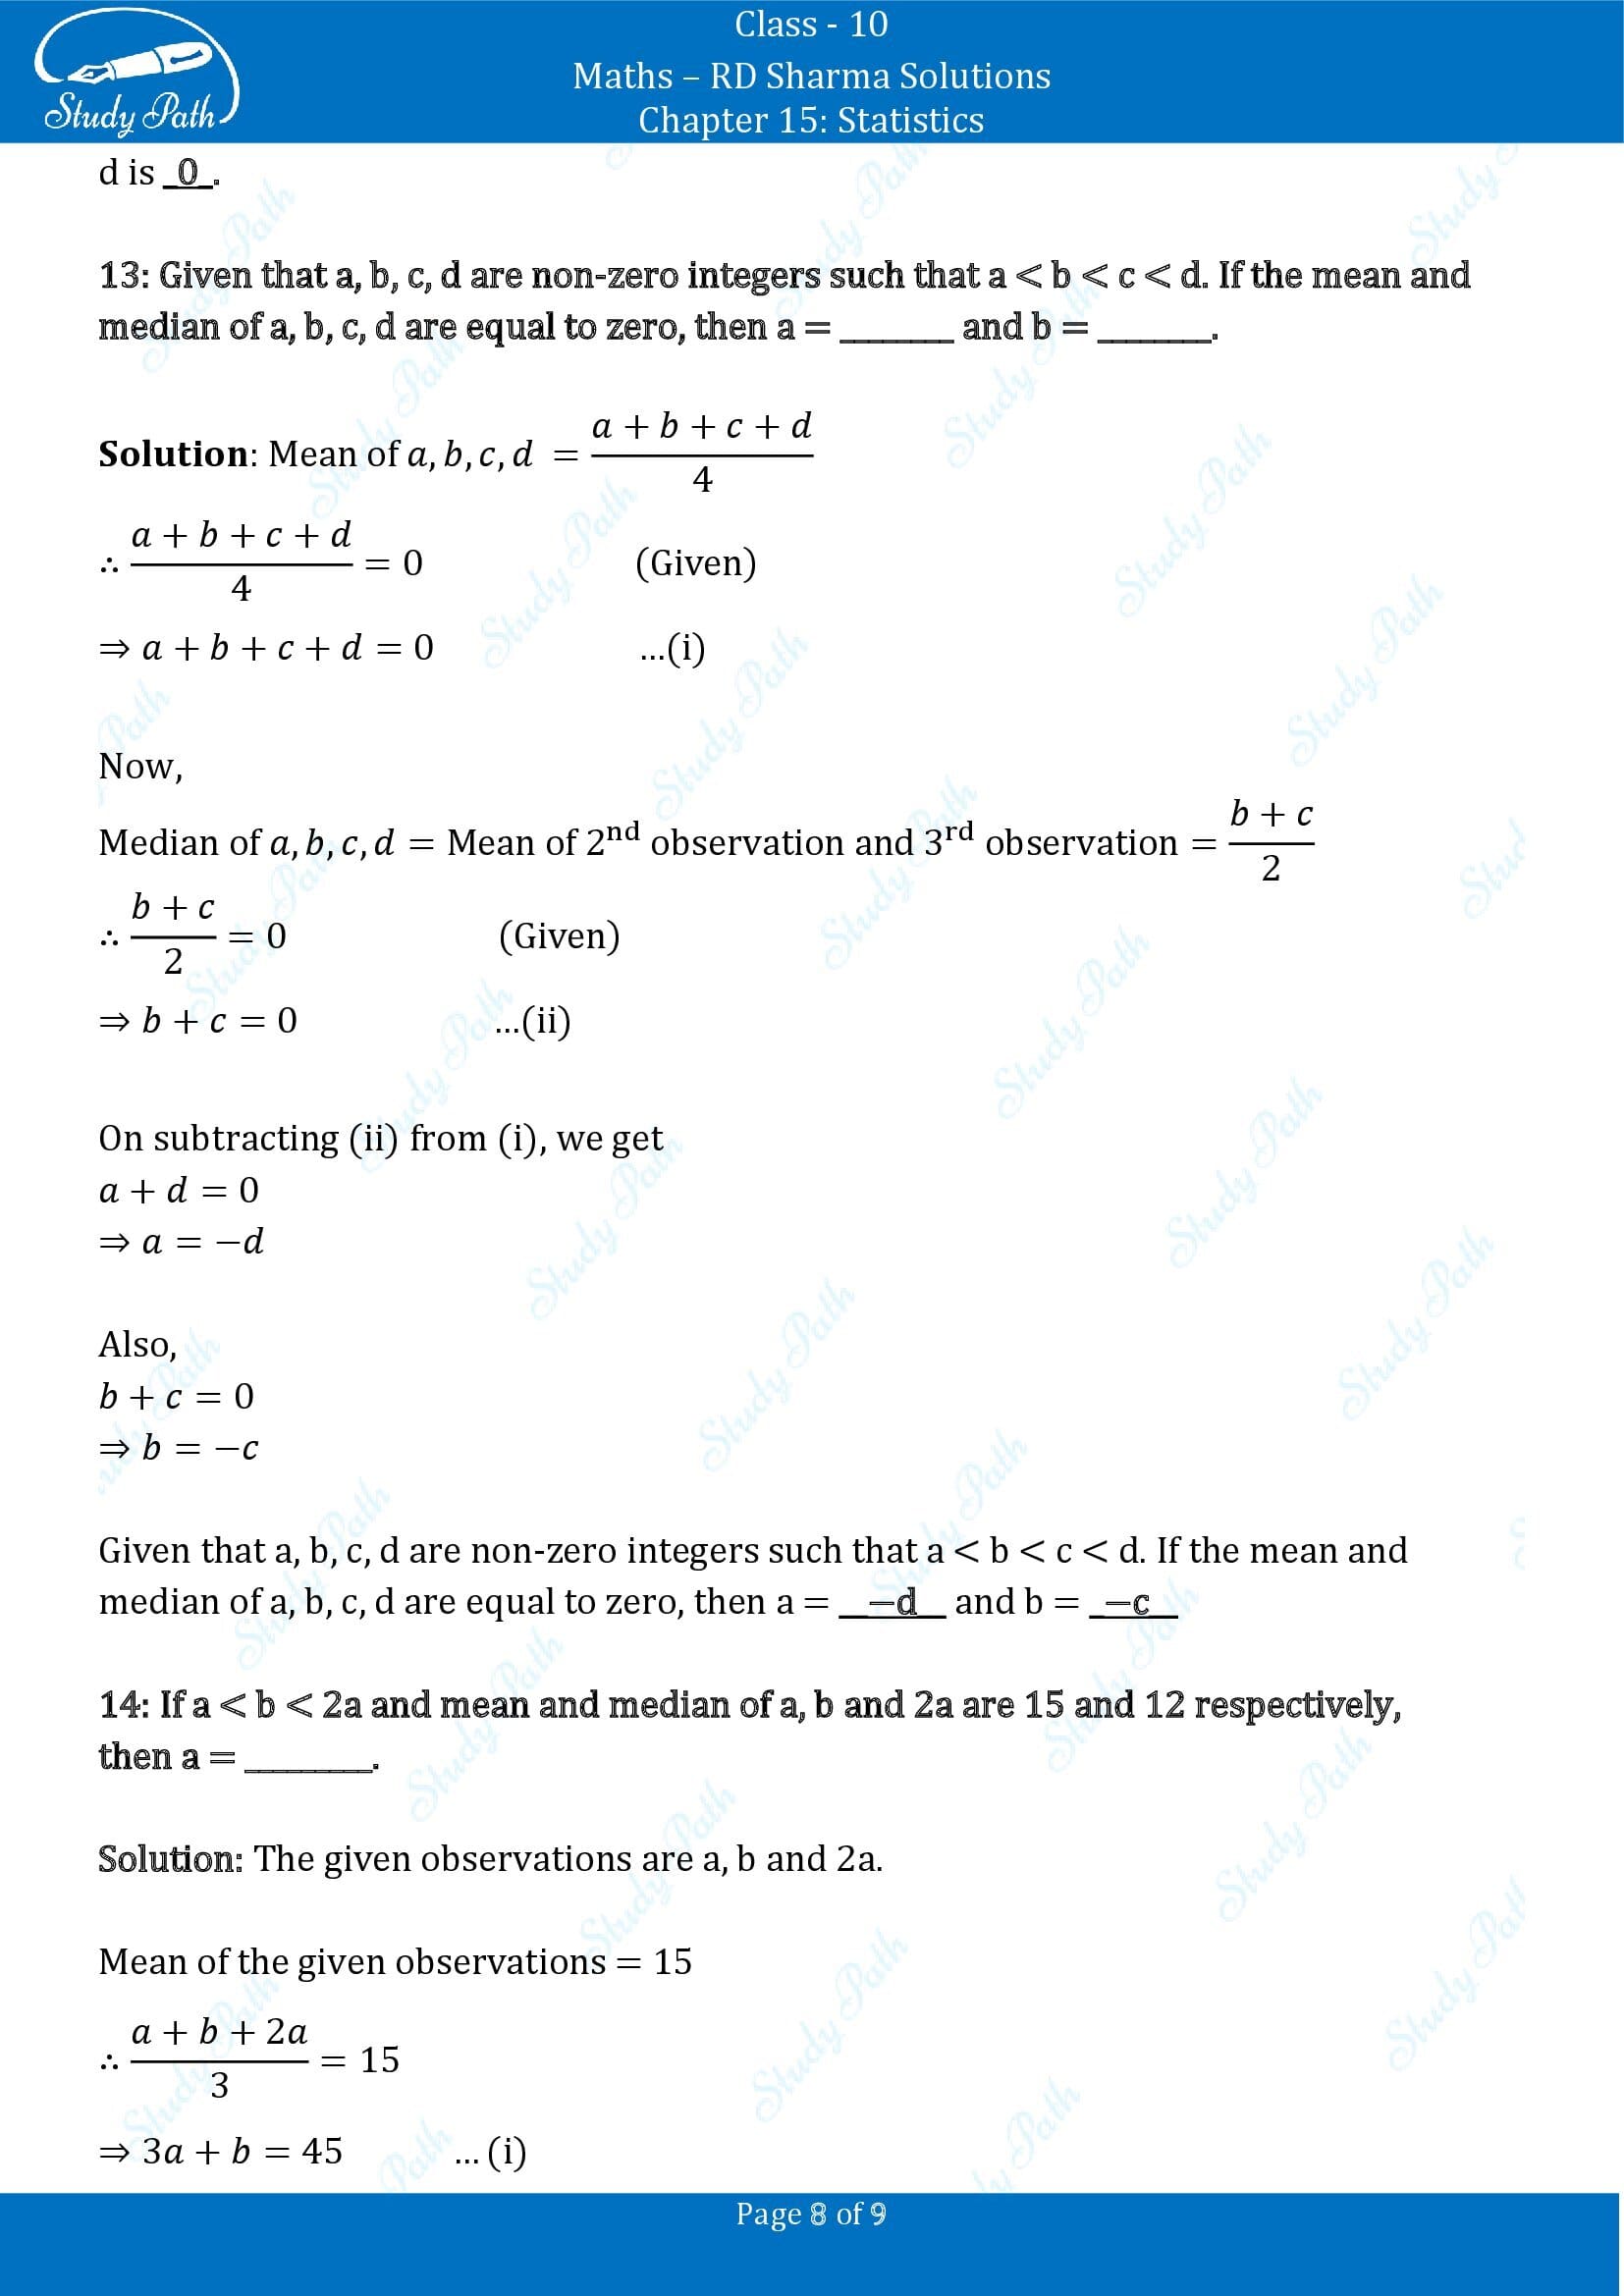 RD Sharma Solutions Class 10 Chapter 15 Statistics Fill in the Blank Type Questions FBQs 00008